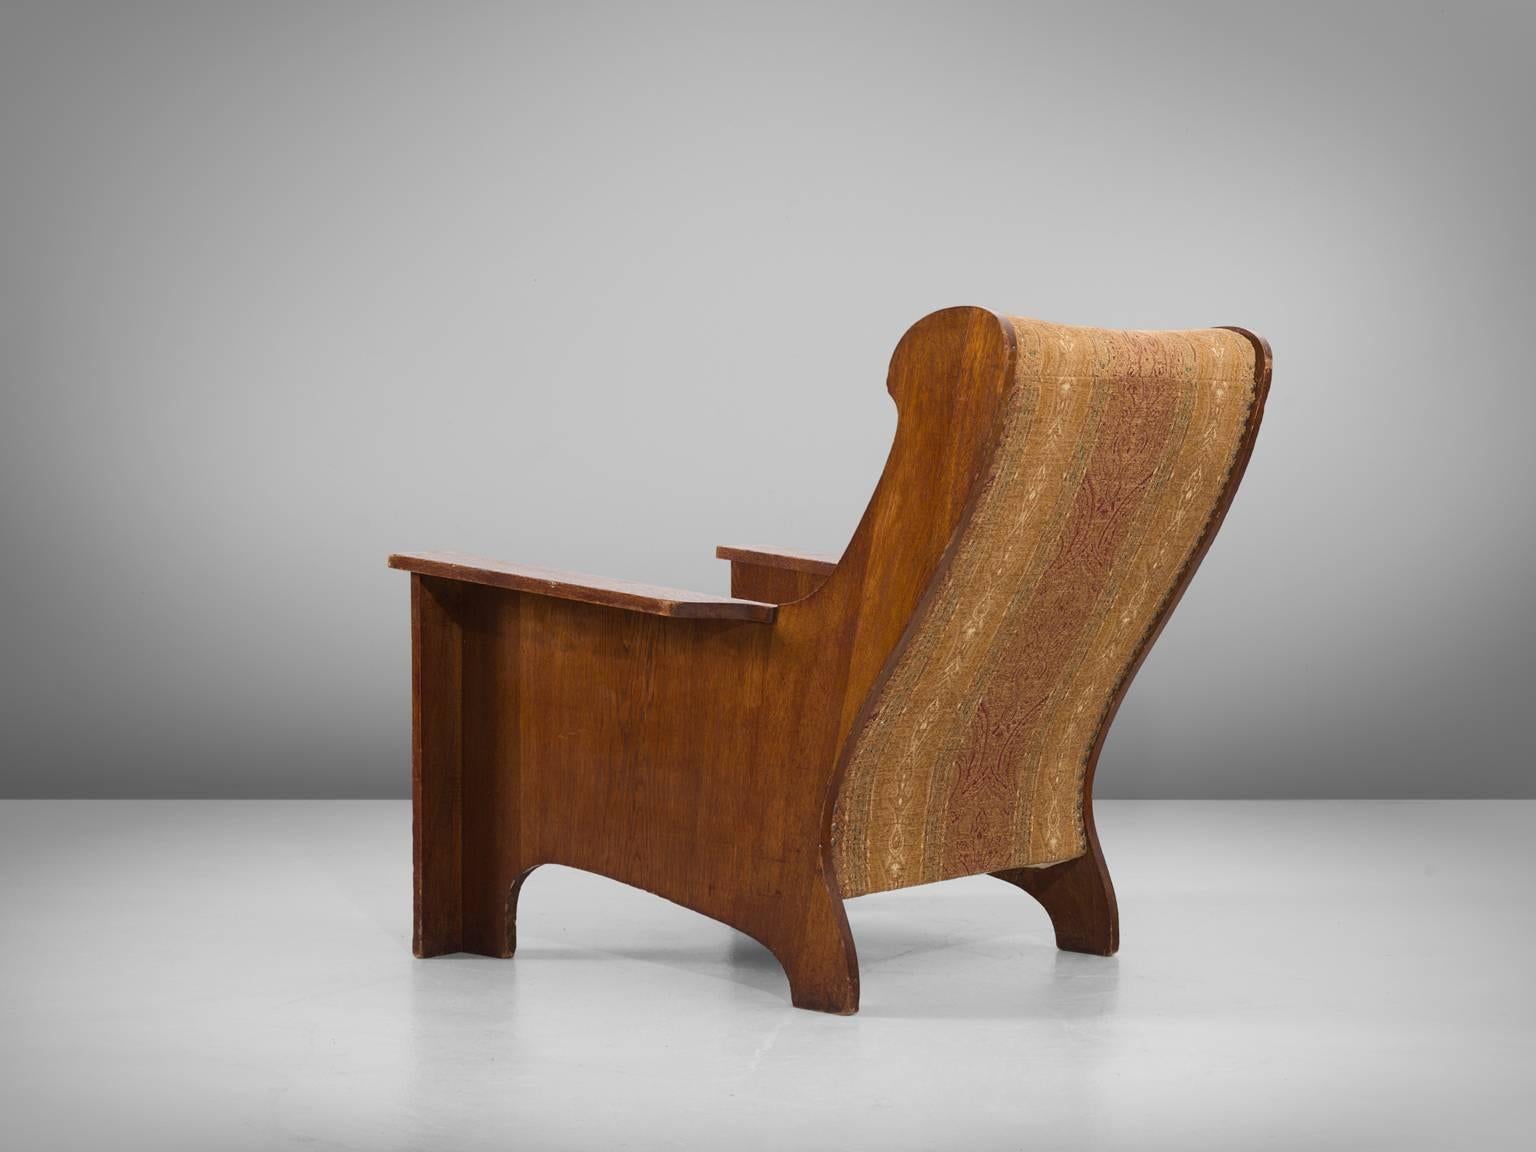 Armchair in oak and fabric, Sweden, 1930s. 

Extraordinary and wide Art Deco lounge chair with a nicely patinated oak wooden frame. This chair shows some interesting lines. The back is nicely curved with elegant lines. The front has a more sturdy